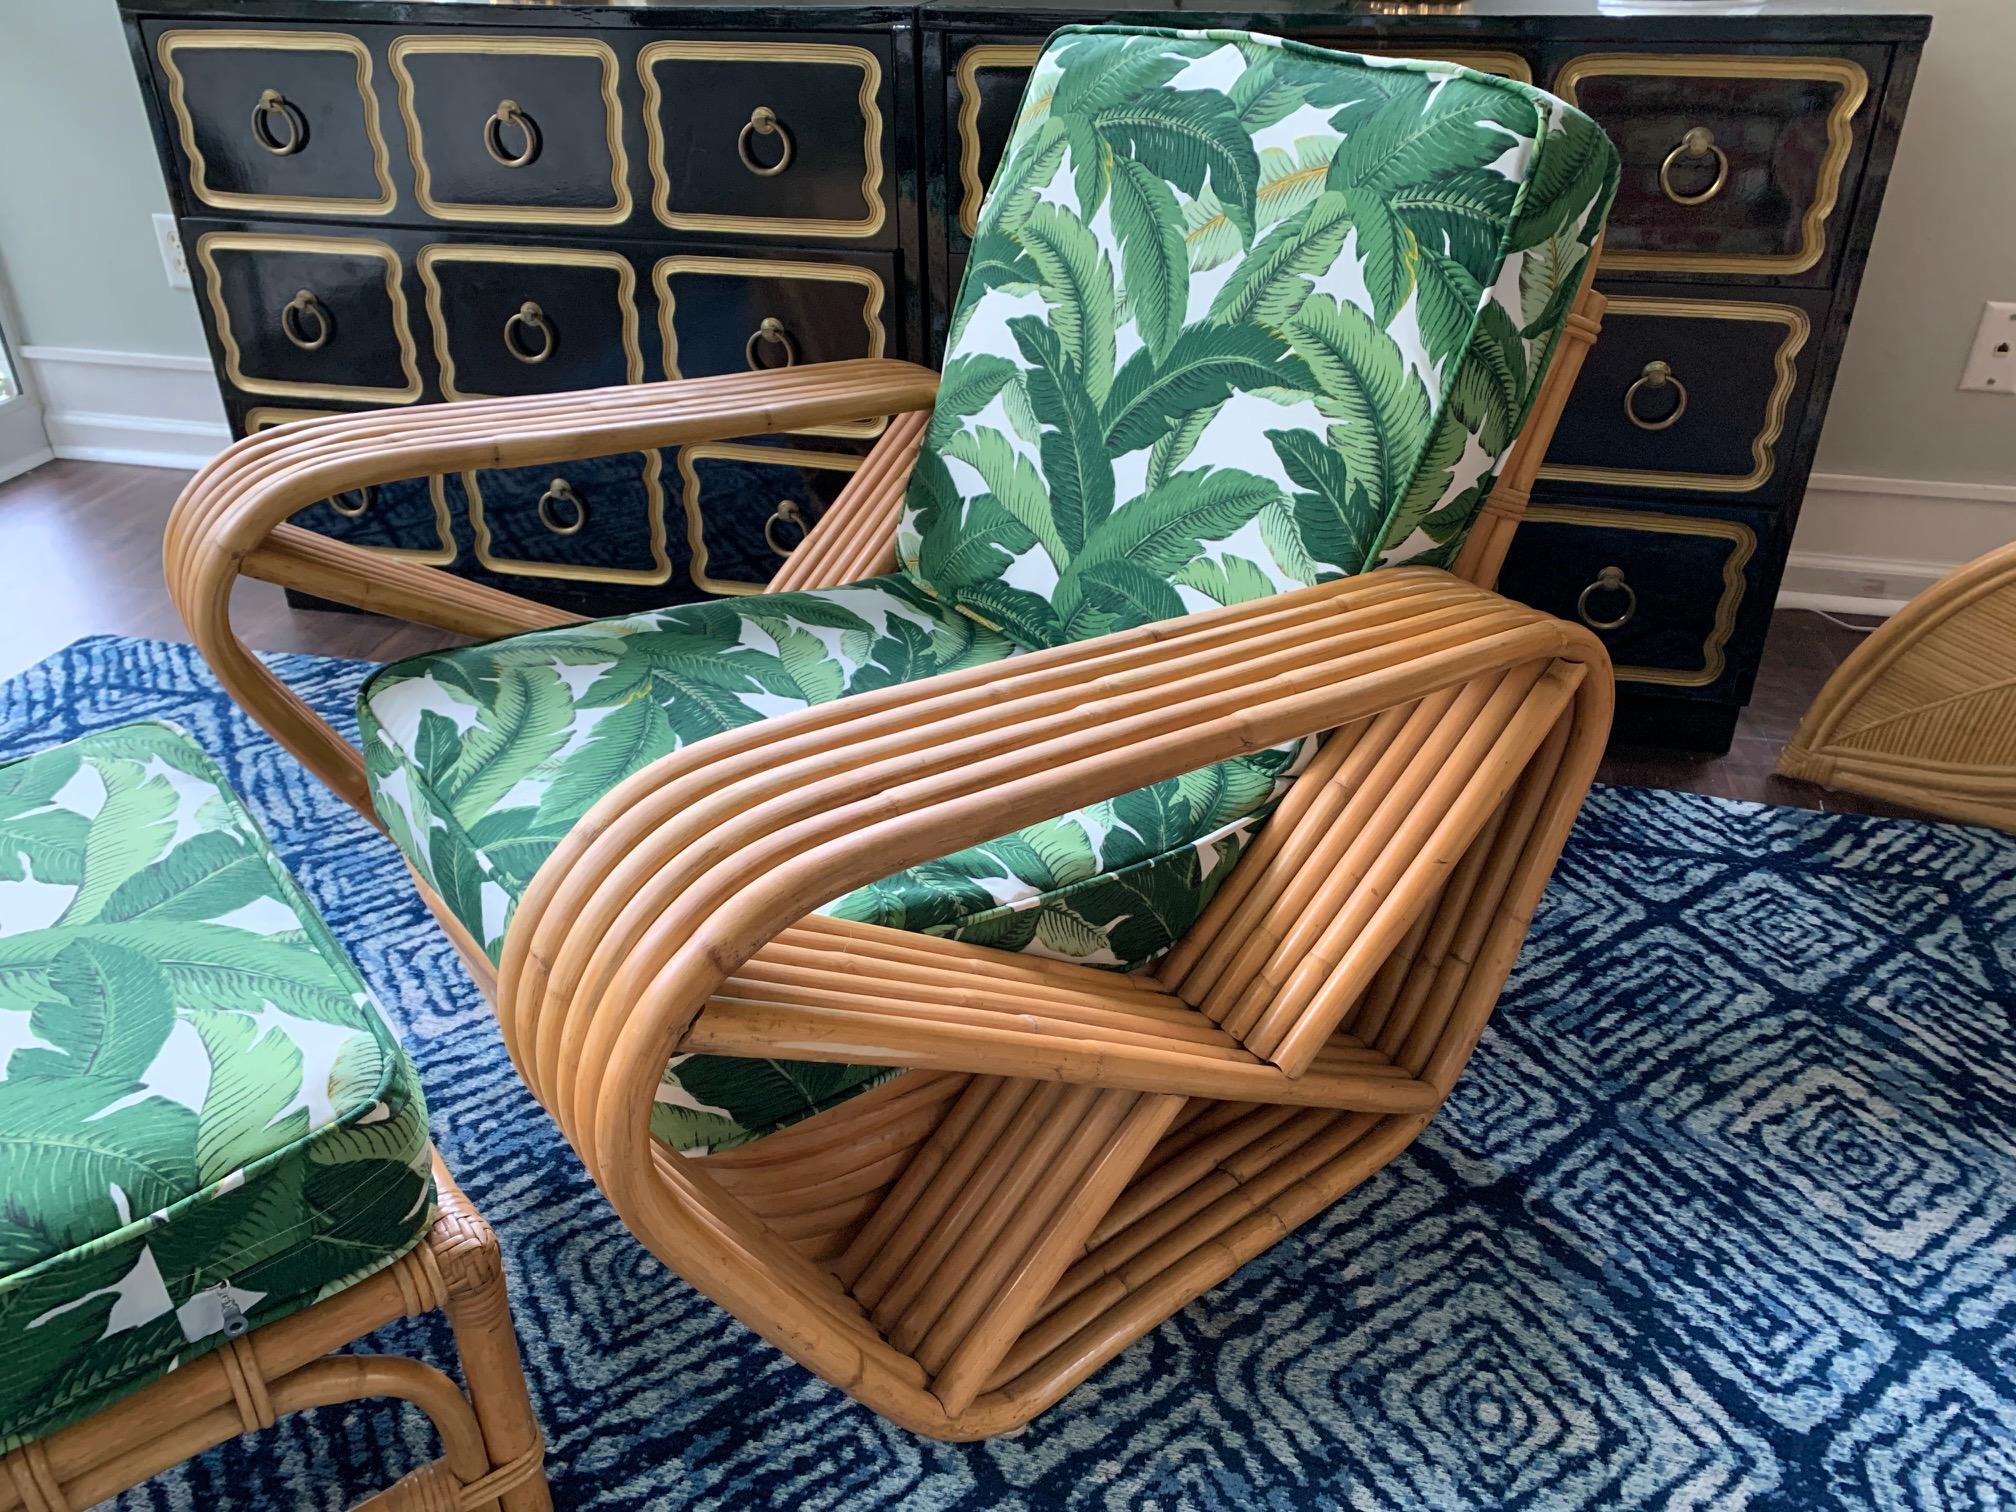 Vintage rattan lounge chair and ottoman in the manner of Paul Frankl features coveted six strand design and new palm leaf upholstery. Matching ottoman included. Very good condition with very minor imperfections consistent with gentle use. New